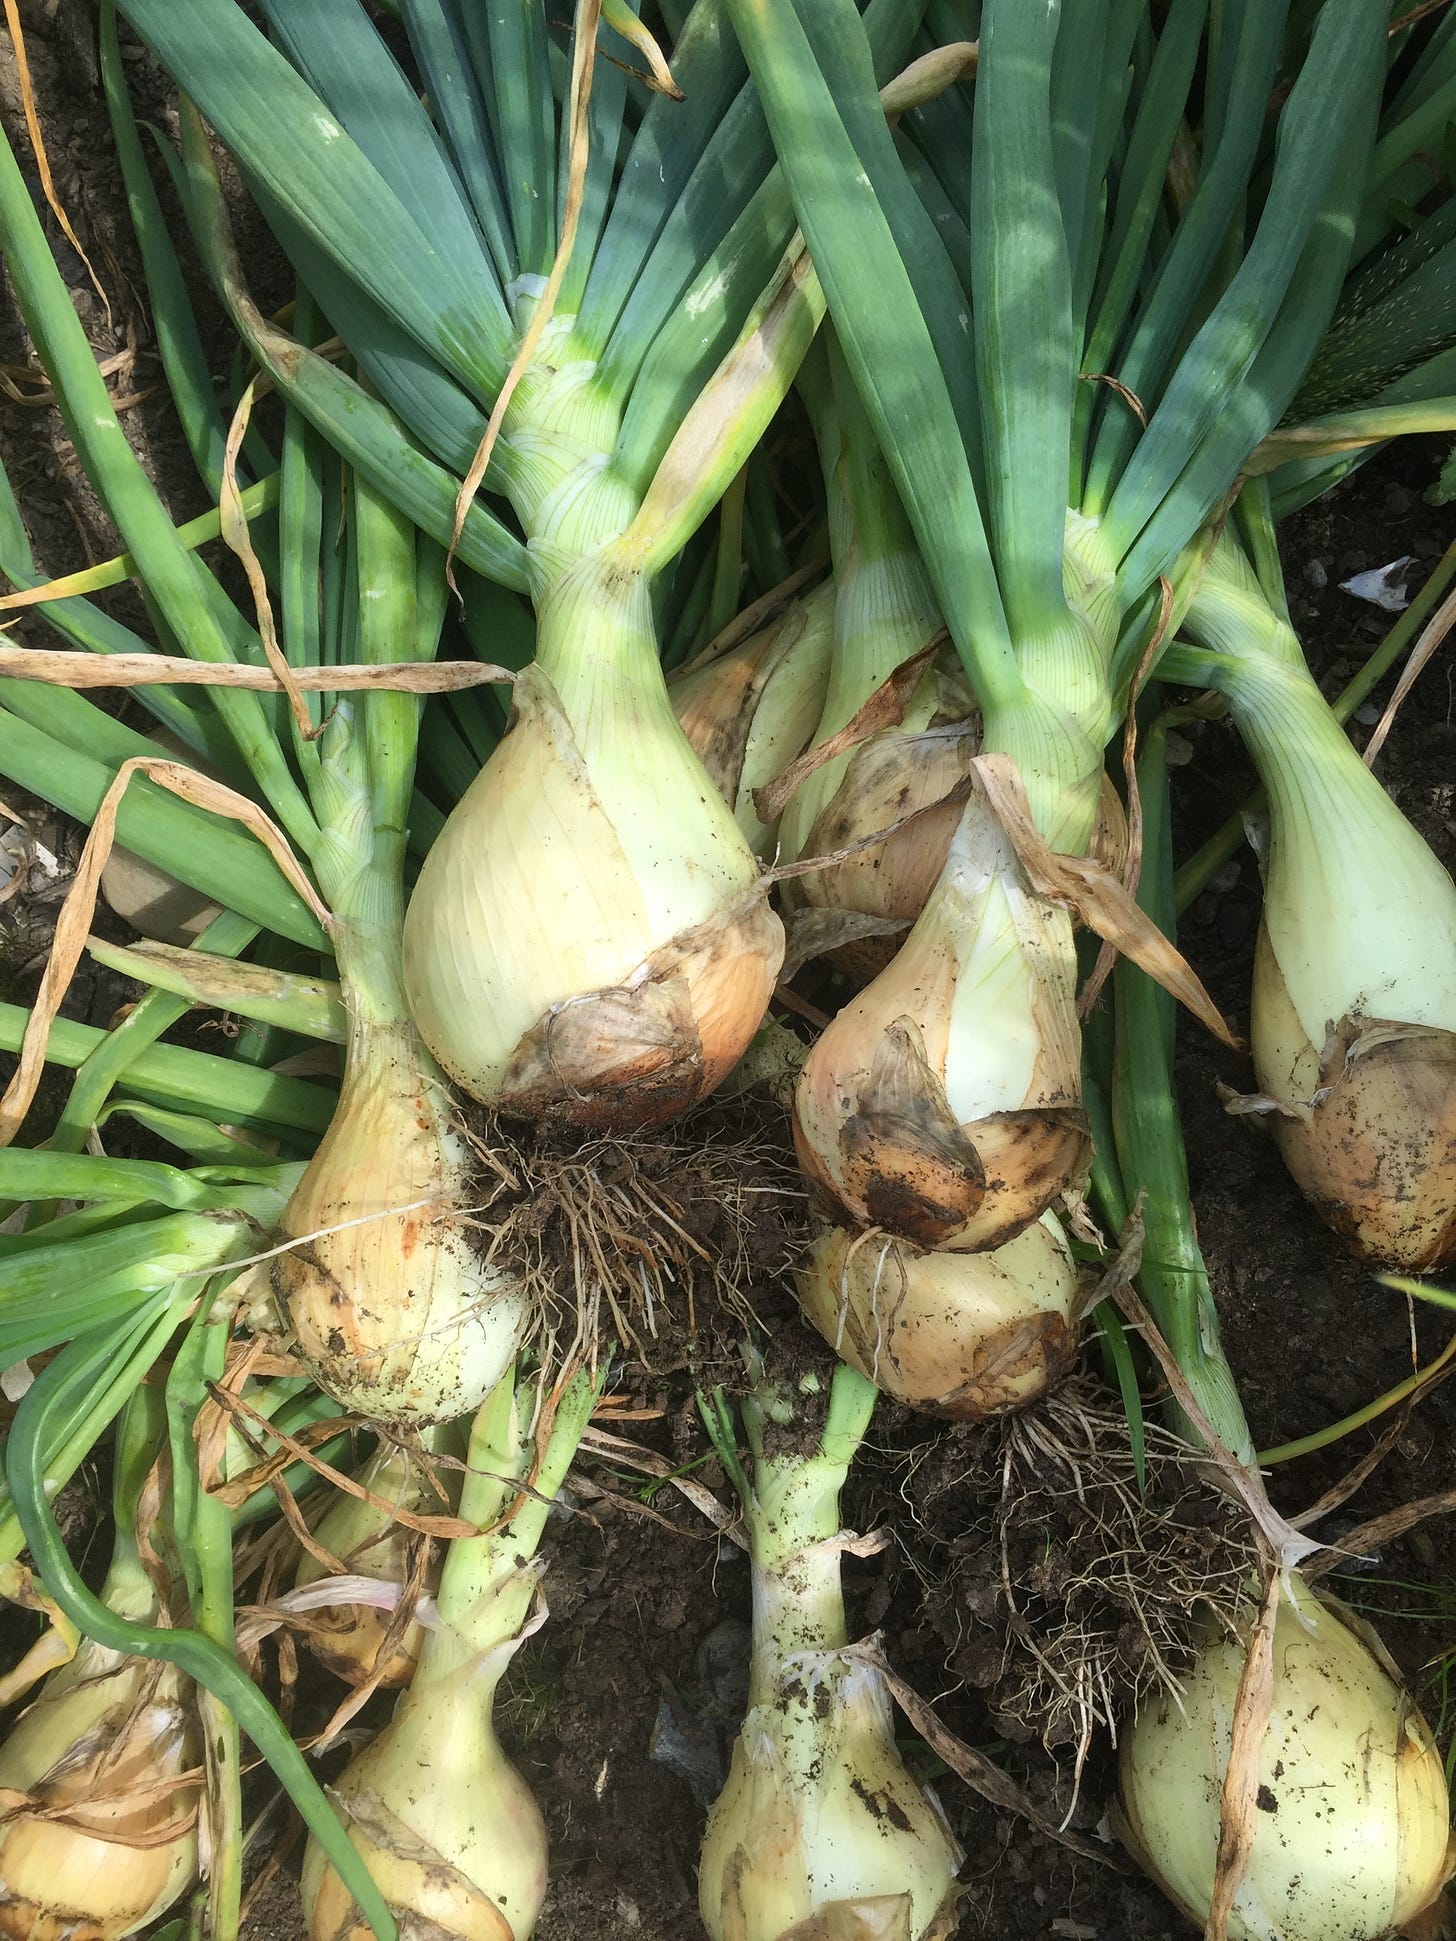 yellow onions with green stalks laying in a pile on the ground